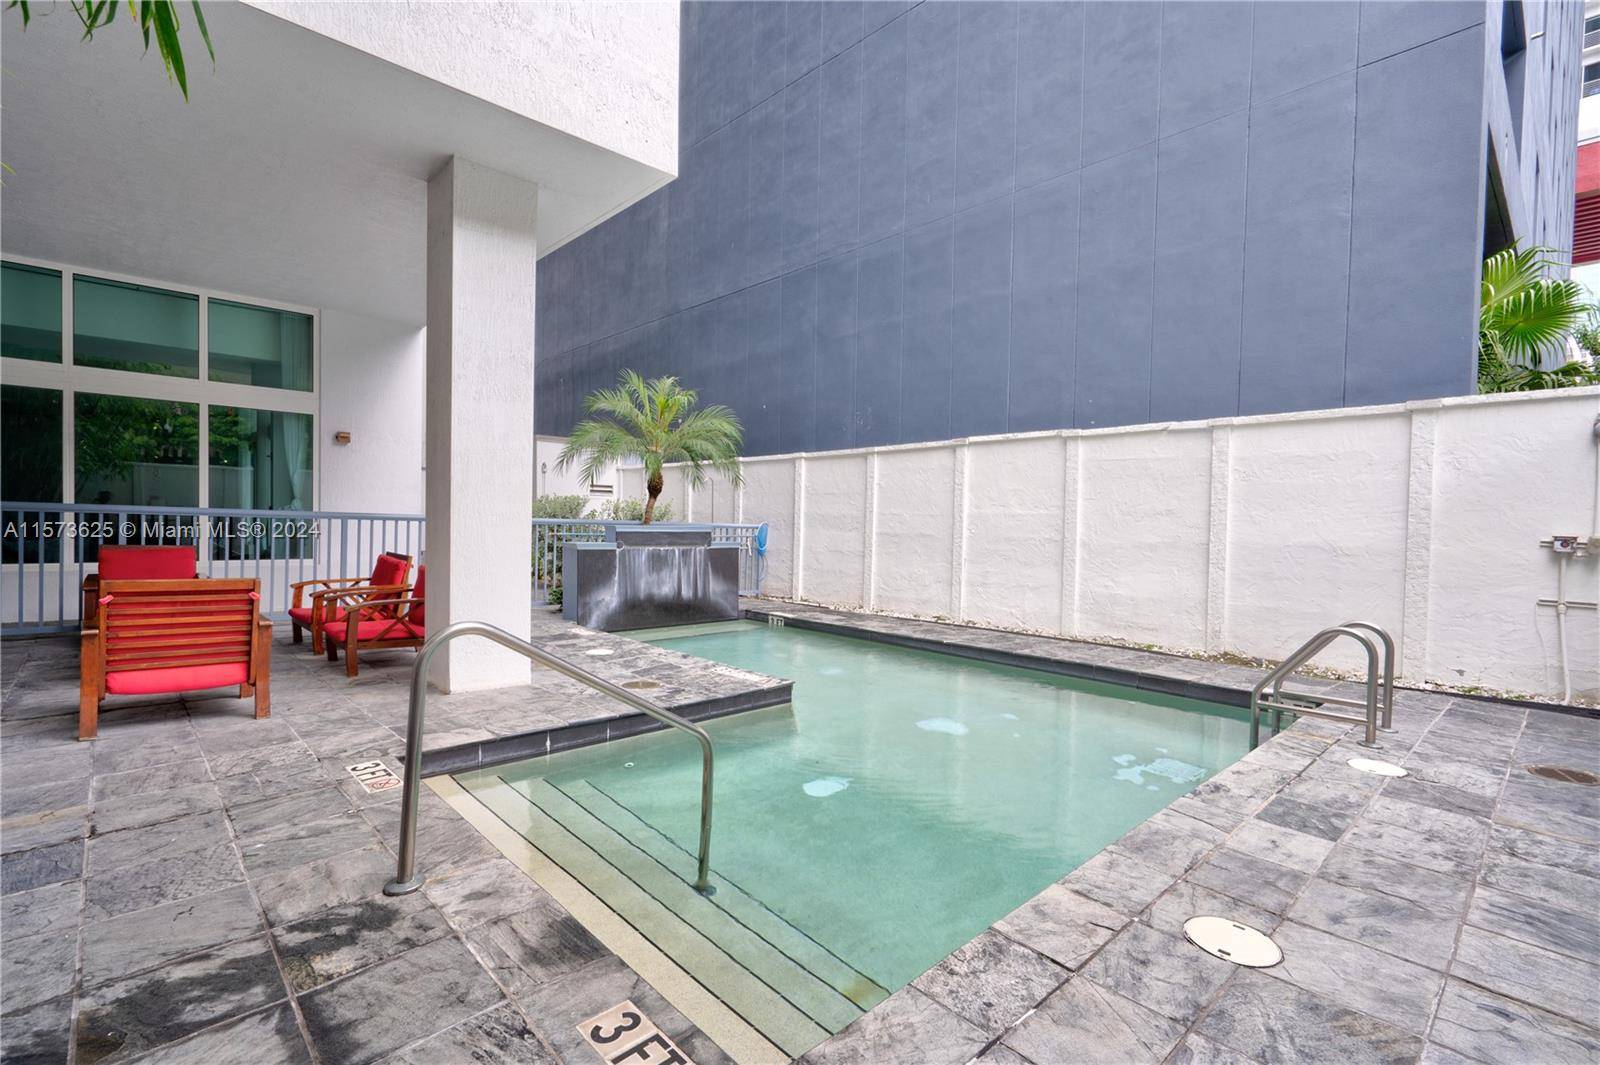 Modern gem in Downtown Miami, corner unit 2 bed 2 bath with 10 foot ceilings and abundant natural light in this elegant interior design.